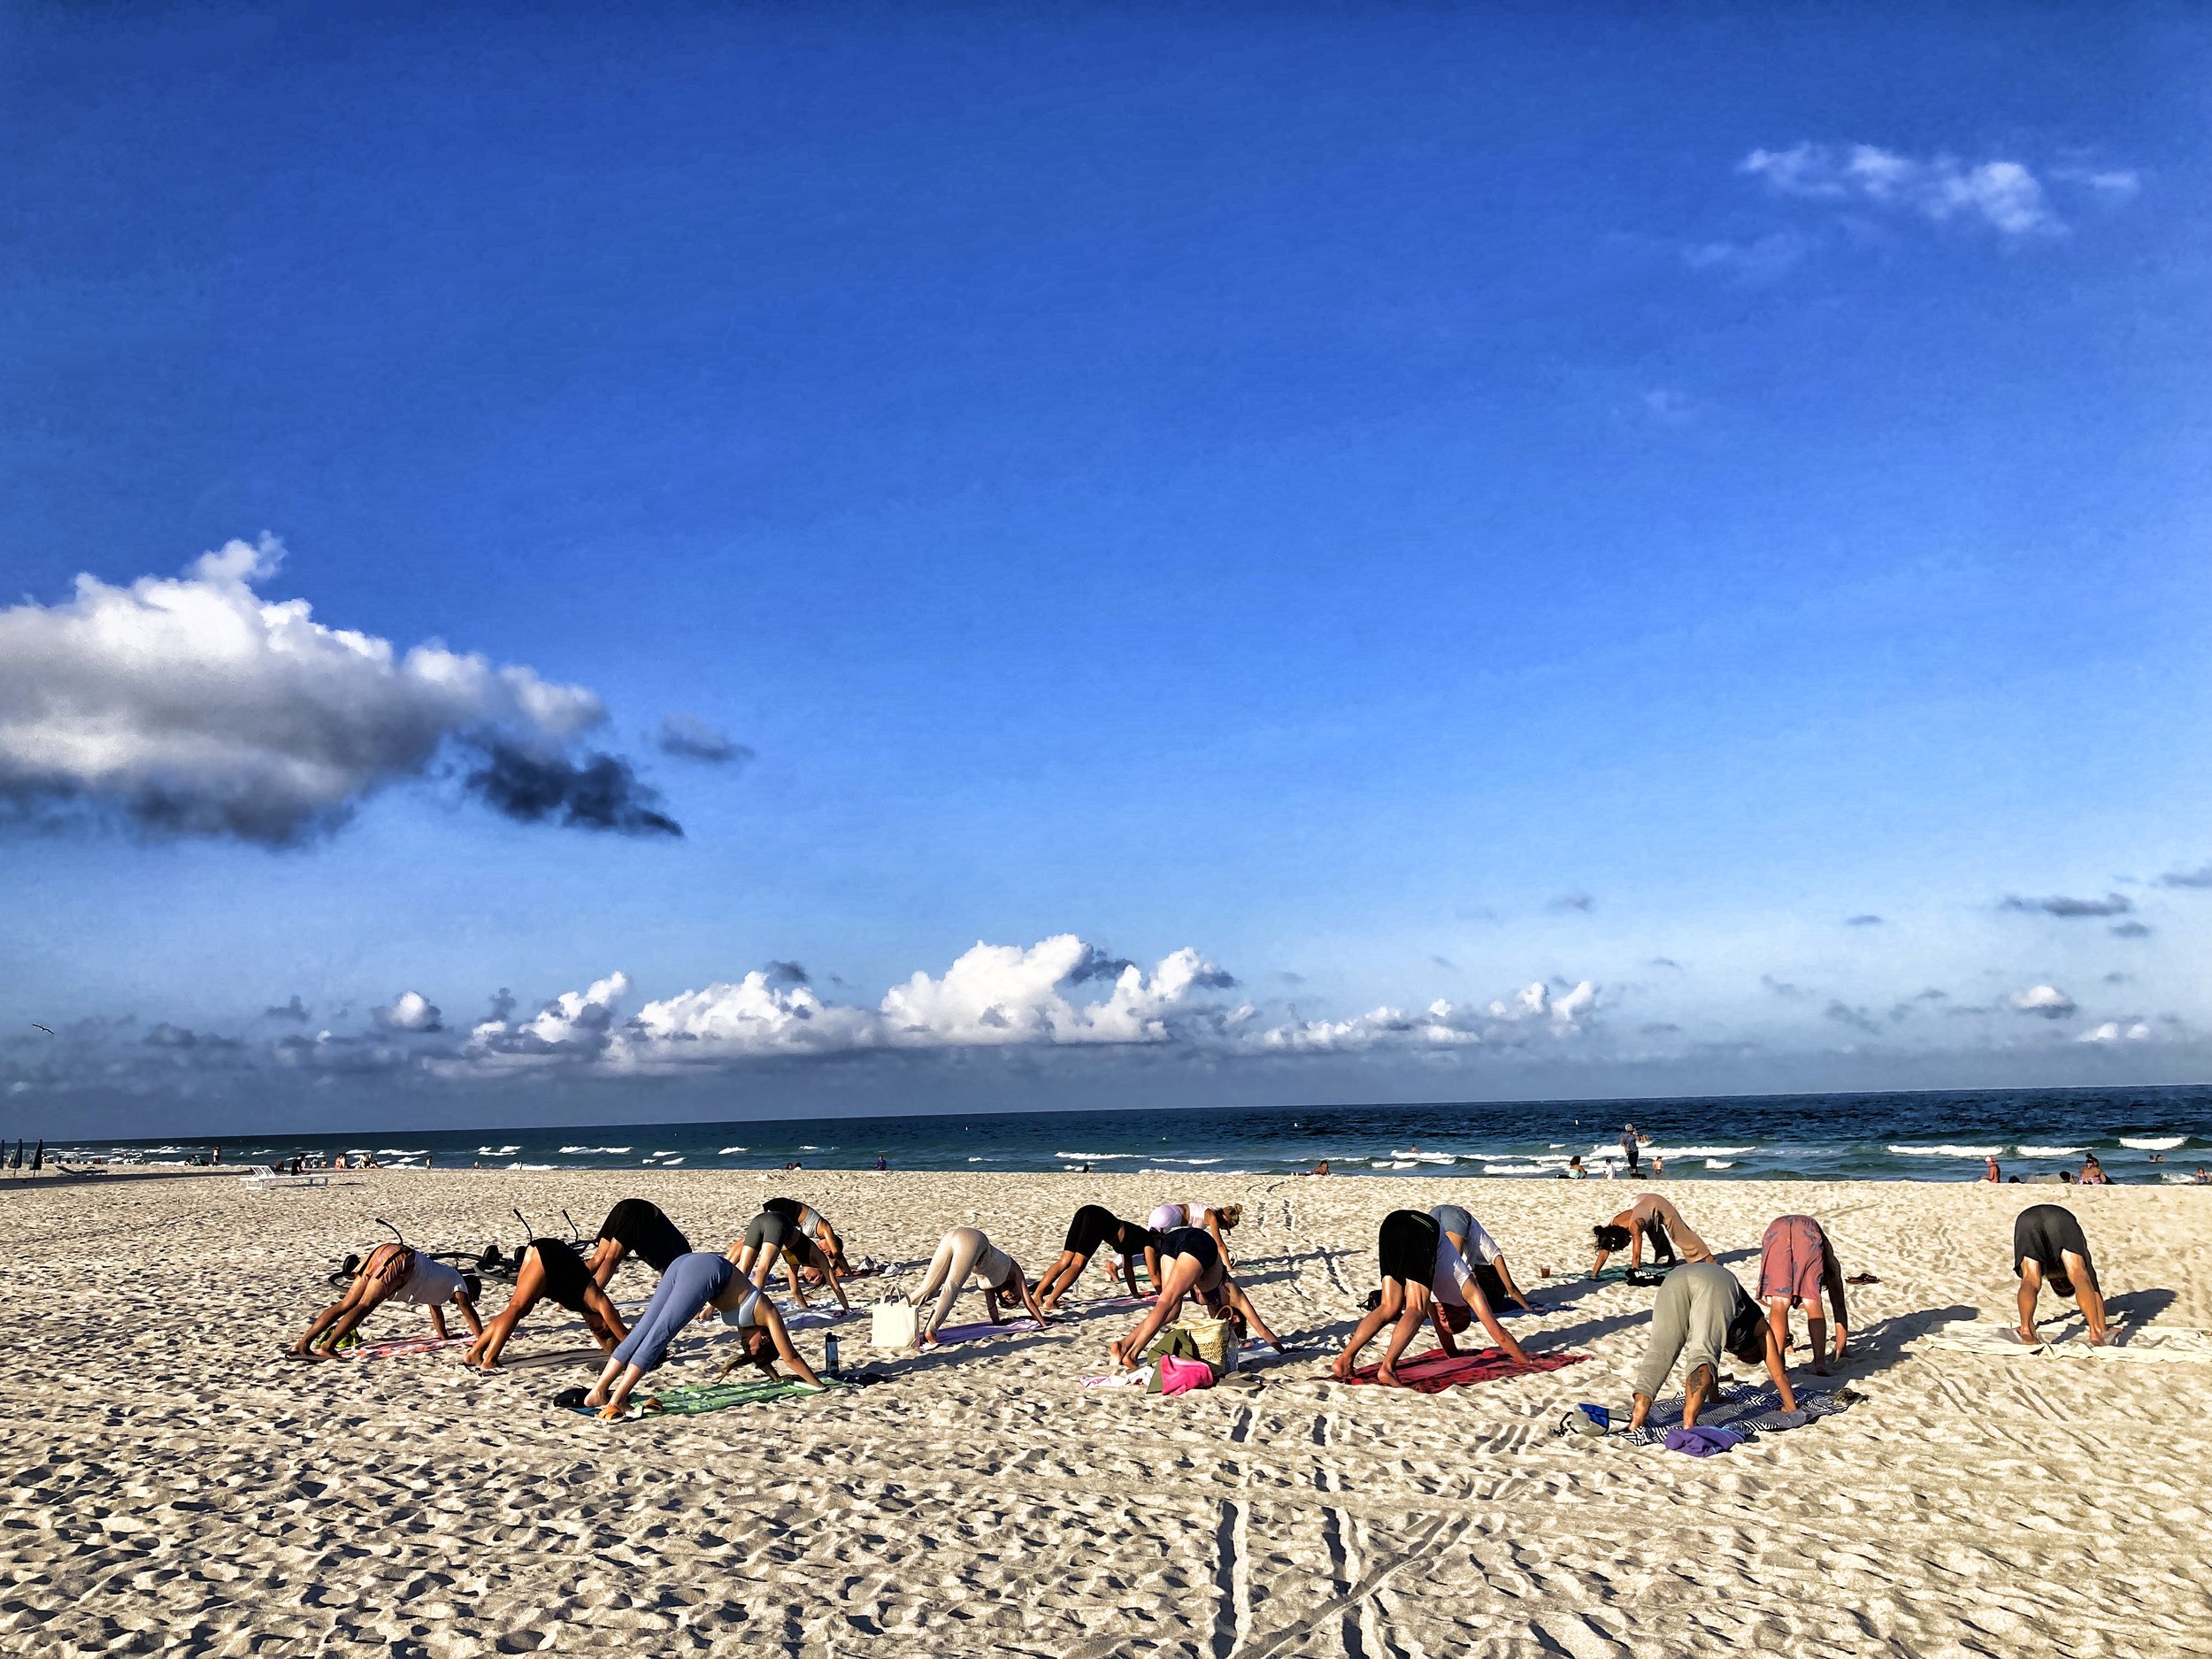 SOUTH BEACH | Downward dogs